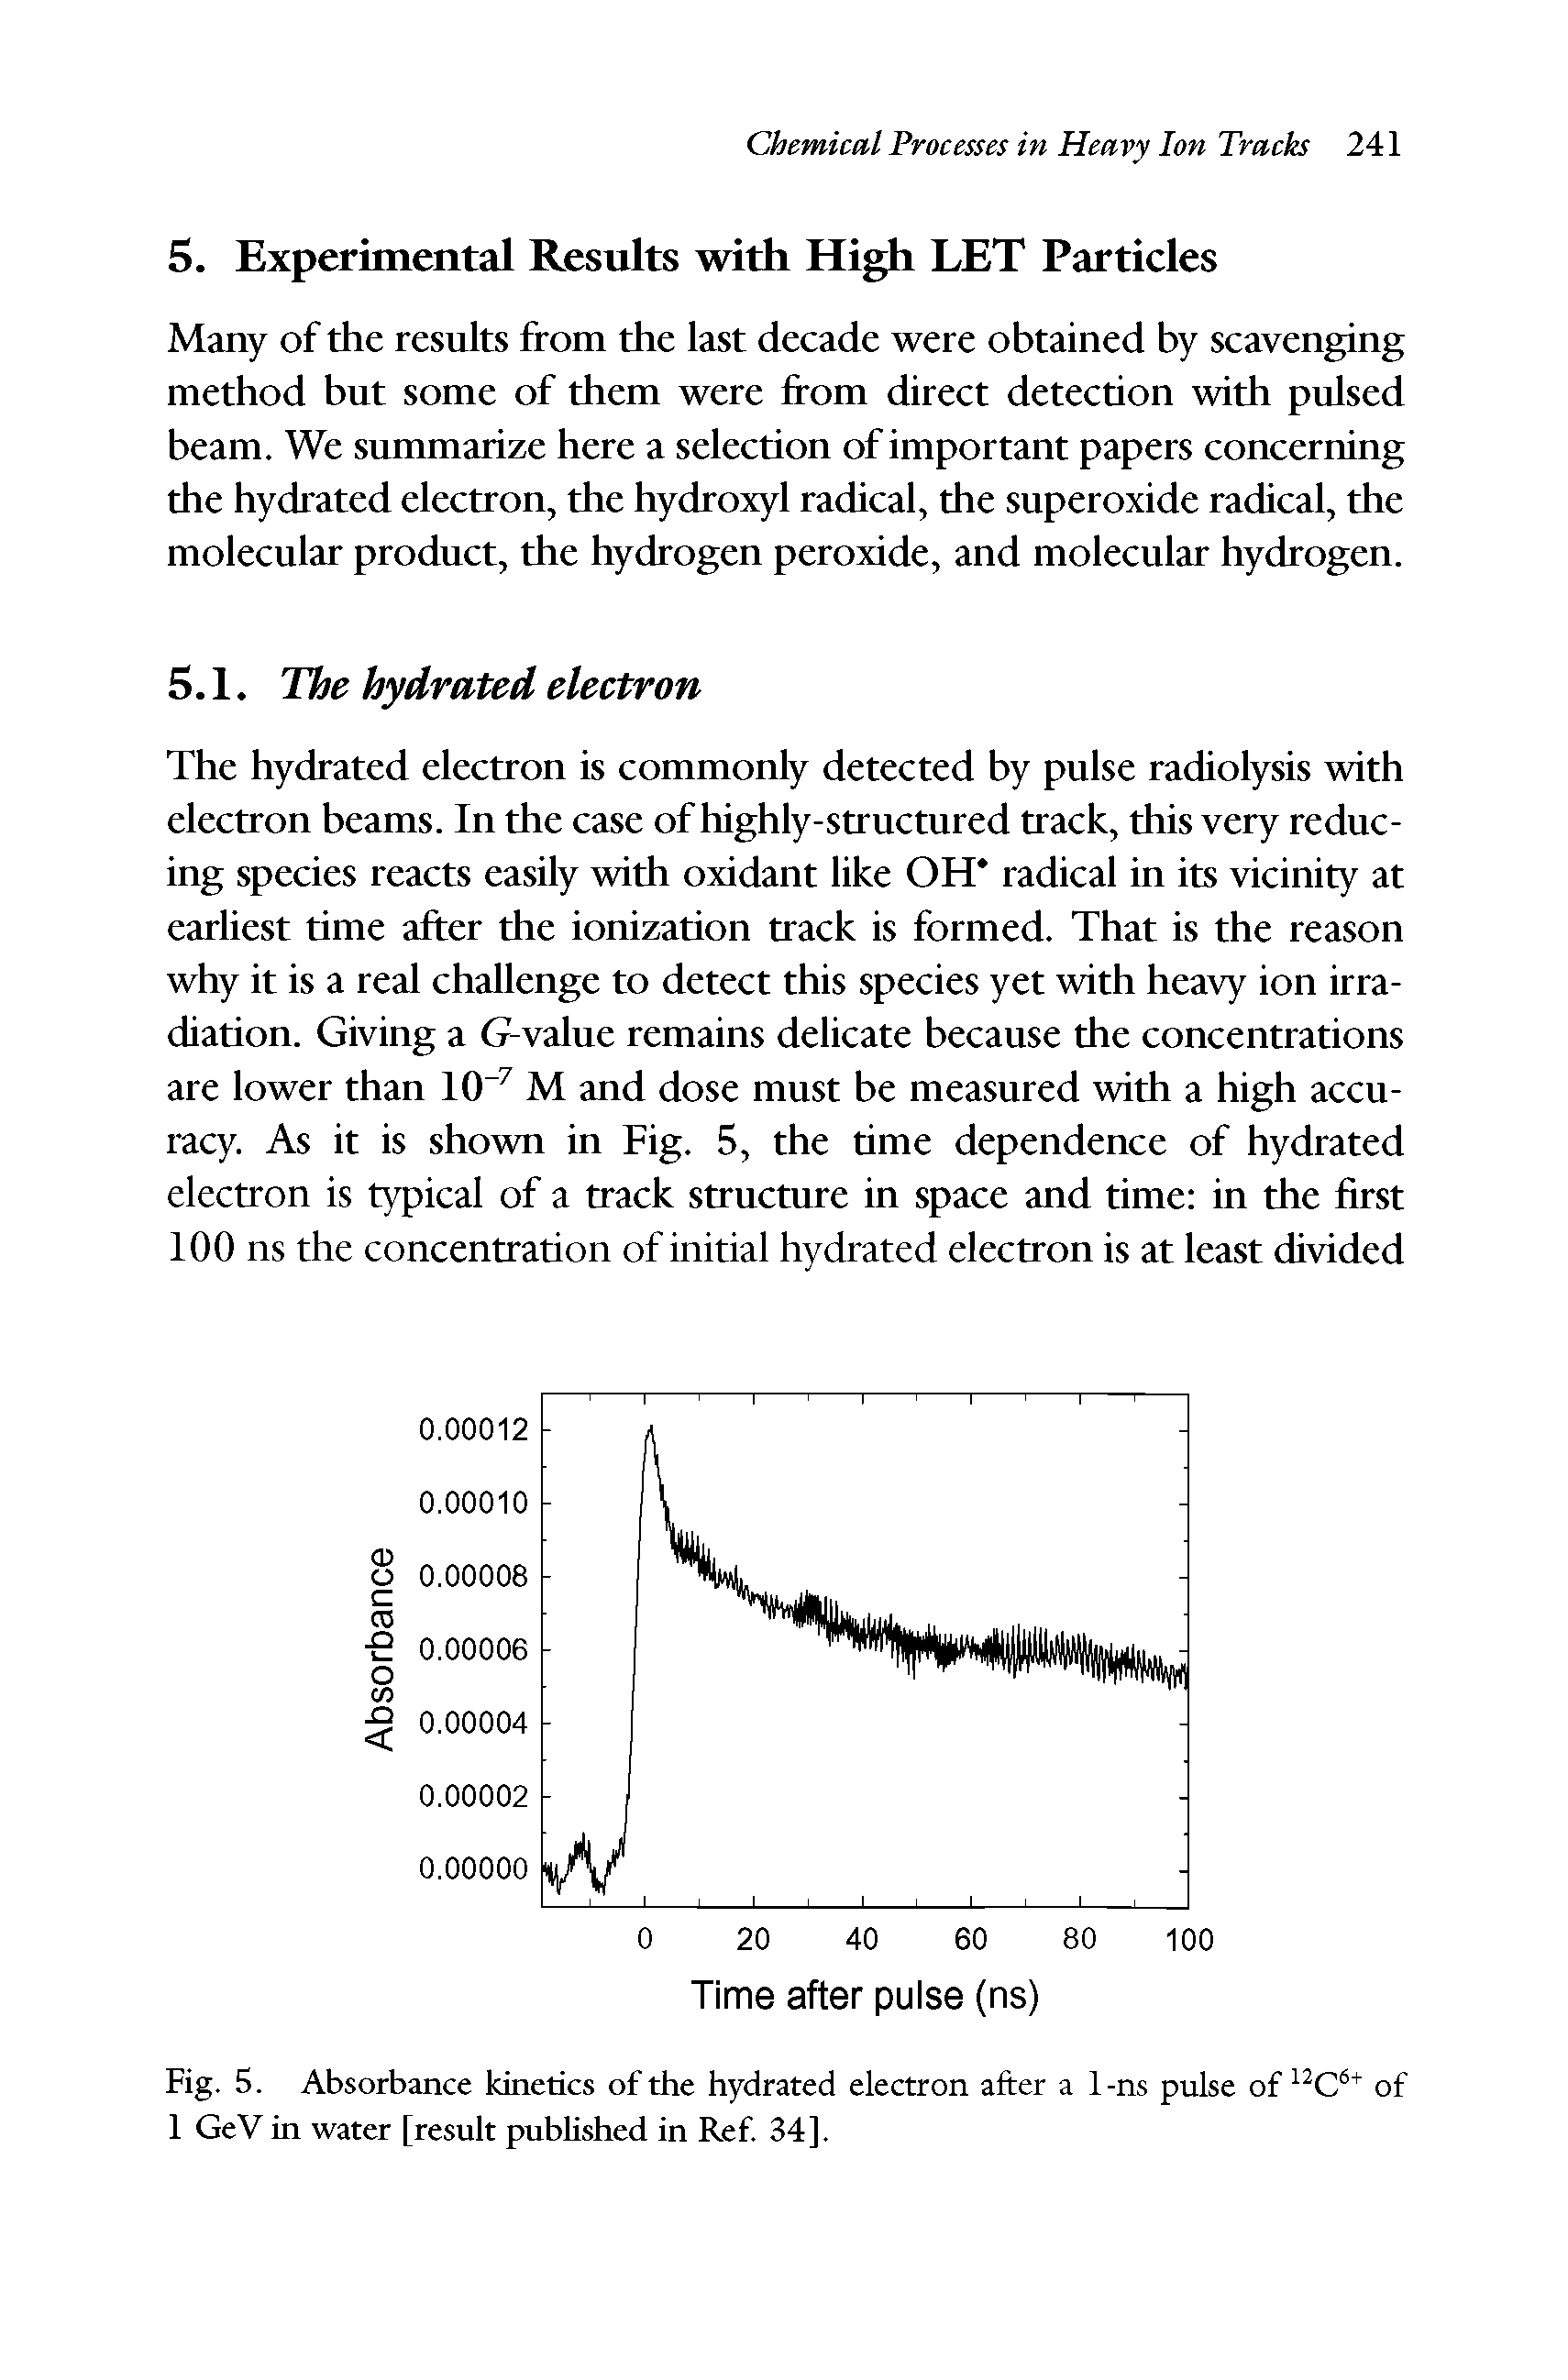 Fig. 5. Absorbance kinetics of the hydrated electron after a 1-ns pulse of of 1 GeV in water [result published in Ref 34].